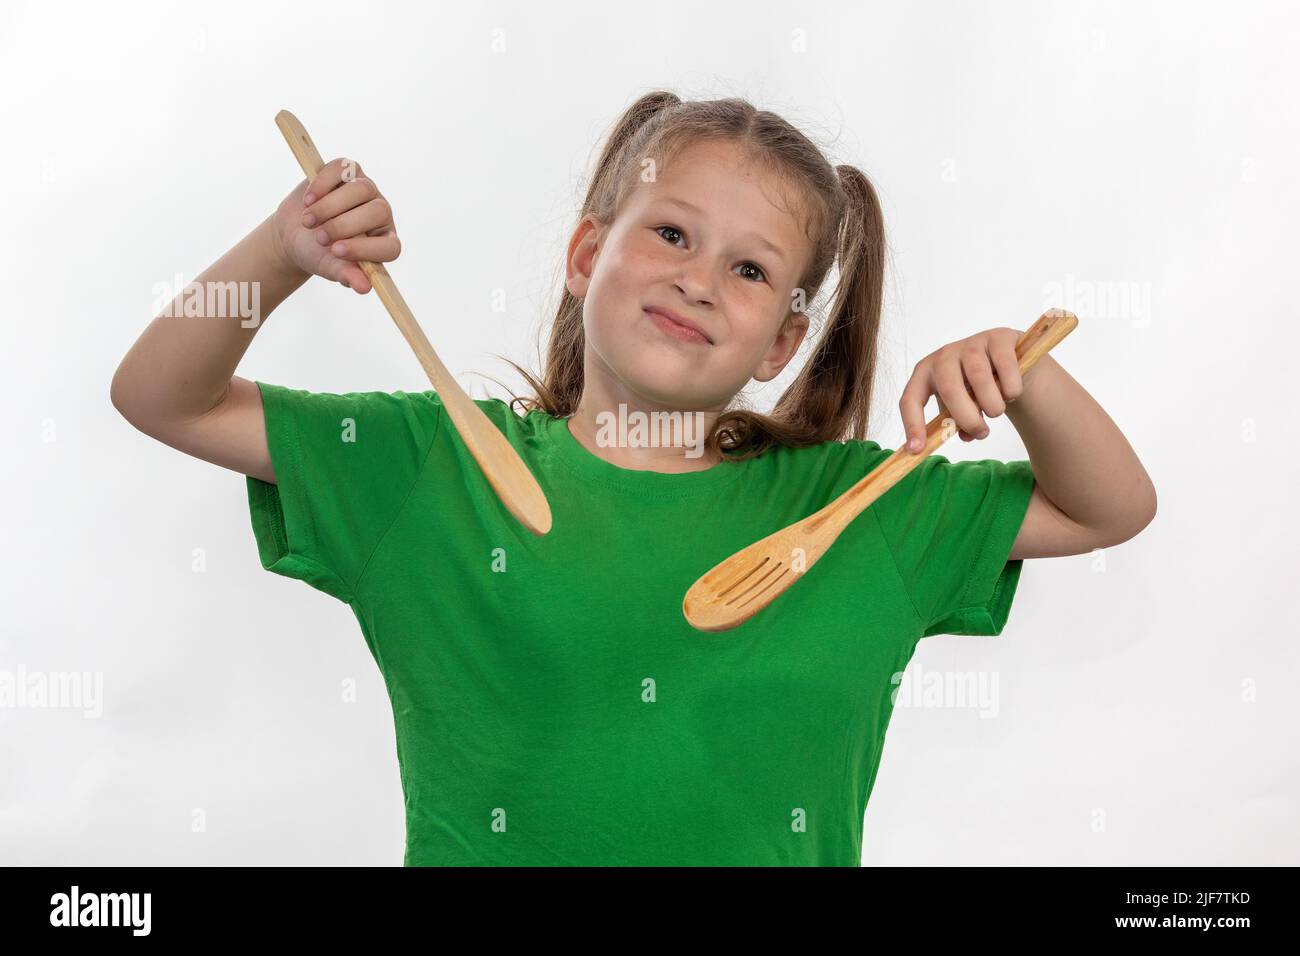 A young girl shows that she loves to cook with her wooden cooking spoons Stock Photo